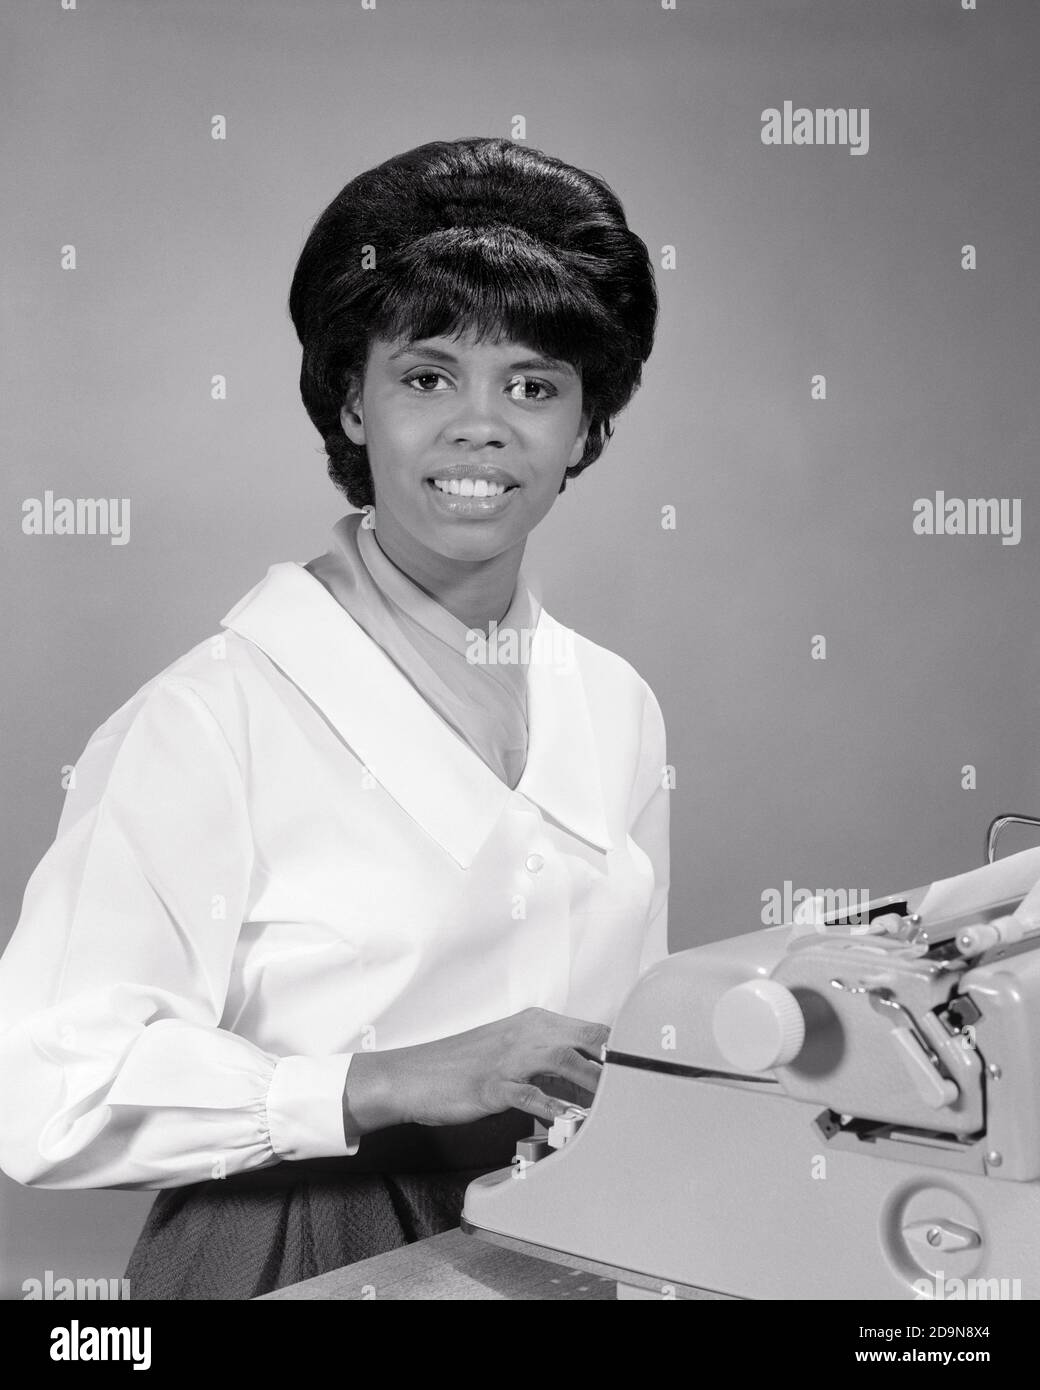 1960s AFRICAN-AMERICAN WOMAN AT ELECTRIC TYPEWRITER IN OFFICE SMILING LOOKING AT CAMERA - n2036 HAR001 HARS COPY SPACE HALF-LENGTH LADIES PERSONS PROFESSION CONFIDENCE B&W BUSINESSWOMAN SKILL OCCUPATION HAPPINESS SKILLS CHEERFUL CUSTOMER SERVICE AFRICAN-AMERICANS AFRICAN-AMERICAN CAREERS BLACK ETHNICITY LABOR PRIDE OFFICE WORKER IN OPPORTUNITY EMPLOYMENT OCCUPATIONS SMILES GAL FRIDAY ADMINISTRATOR JOYFUL SECRETARIES BUSINESSWOMEN EMPLOYEE AMANUENSIS YOUNG ADULT WOMAN BLACK AND WHITE CLERICAL HAR001 LABORING OLD FASHIONED AFRICAN AMERICANS Stock Photo